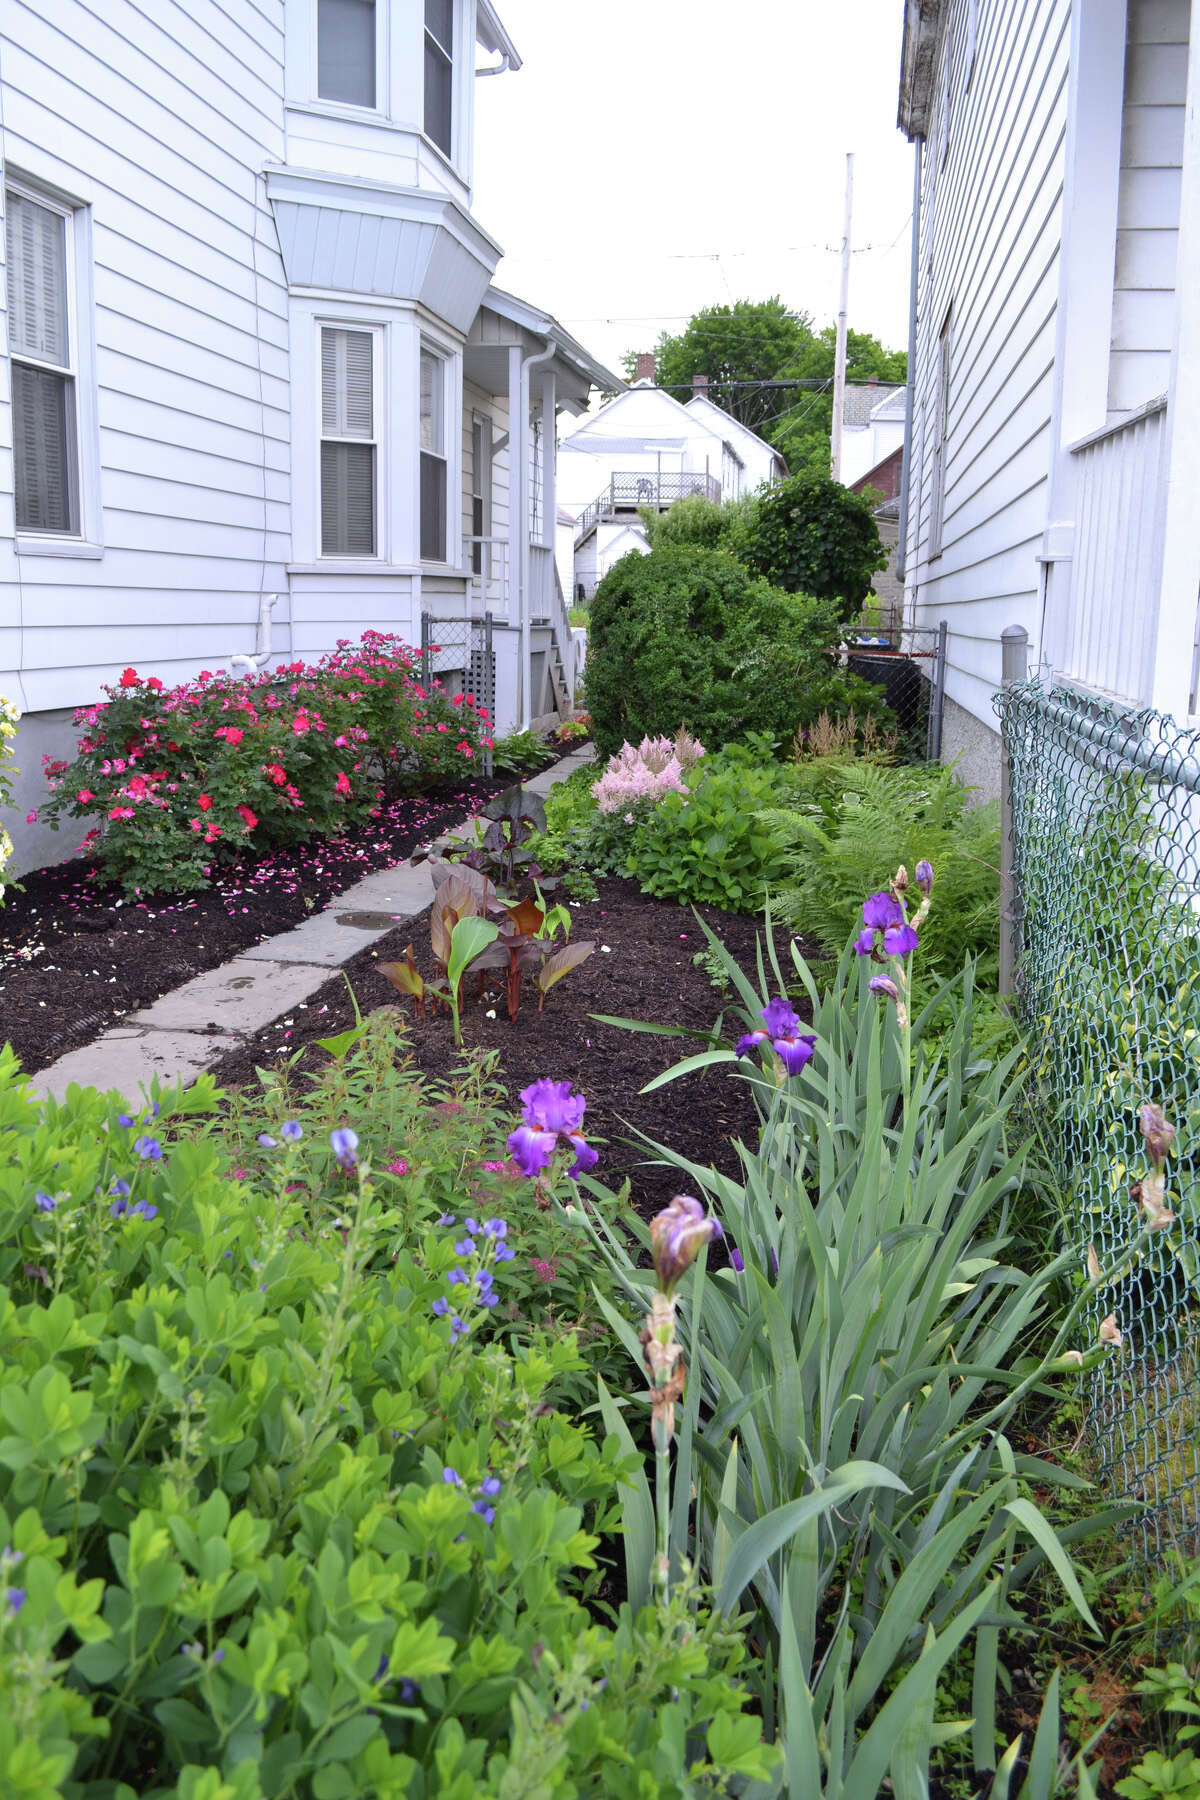 We visited DiNovo’s Lansingburgh home and toured her well-loved garden last year.